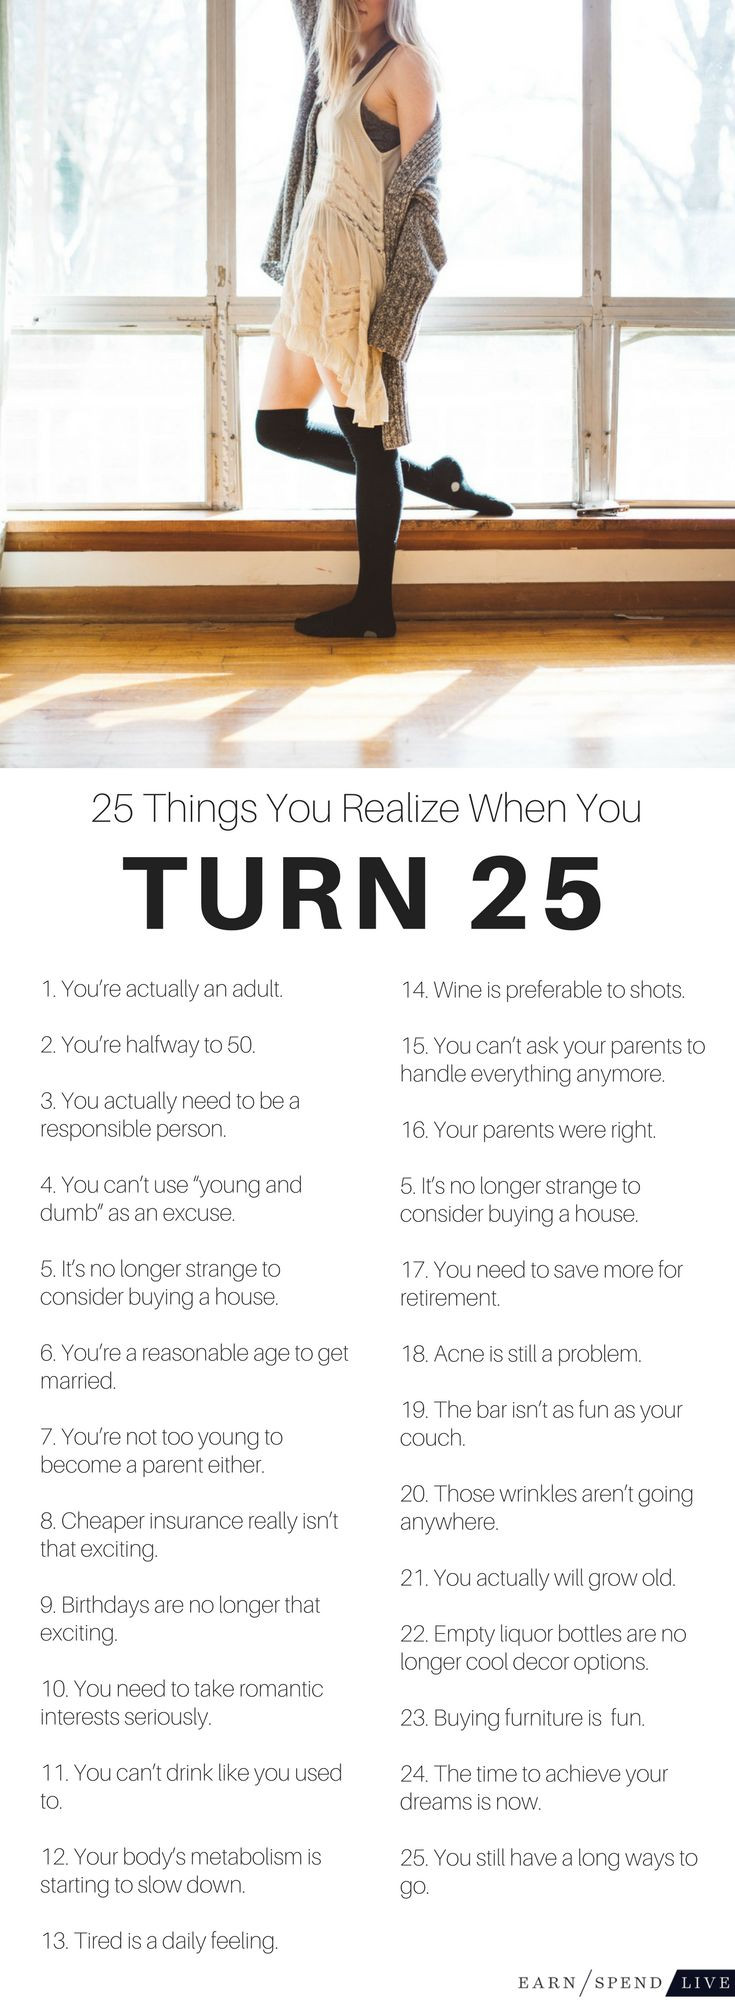 25th Birthday Quotes
 The 25 best 25th birthday ideas on Pinterest